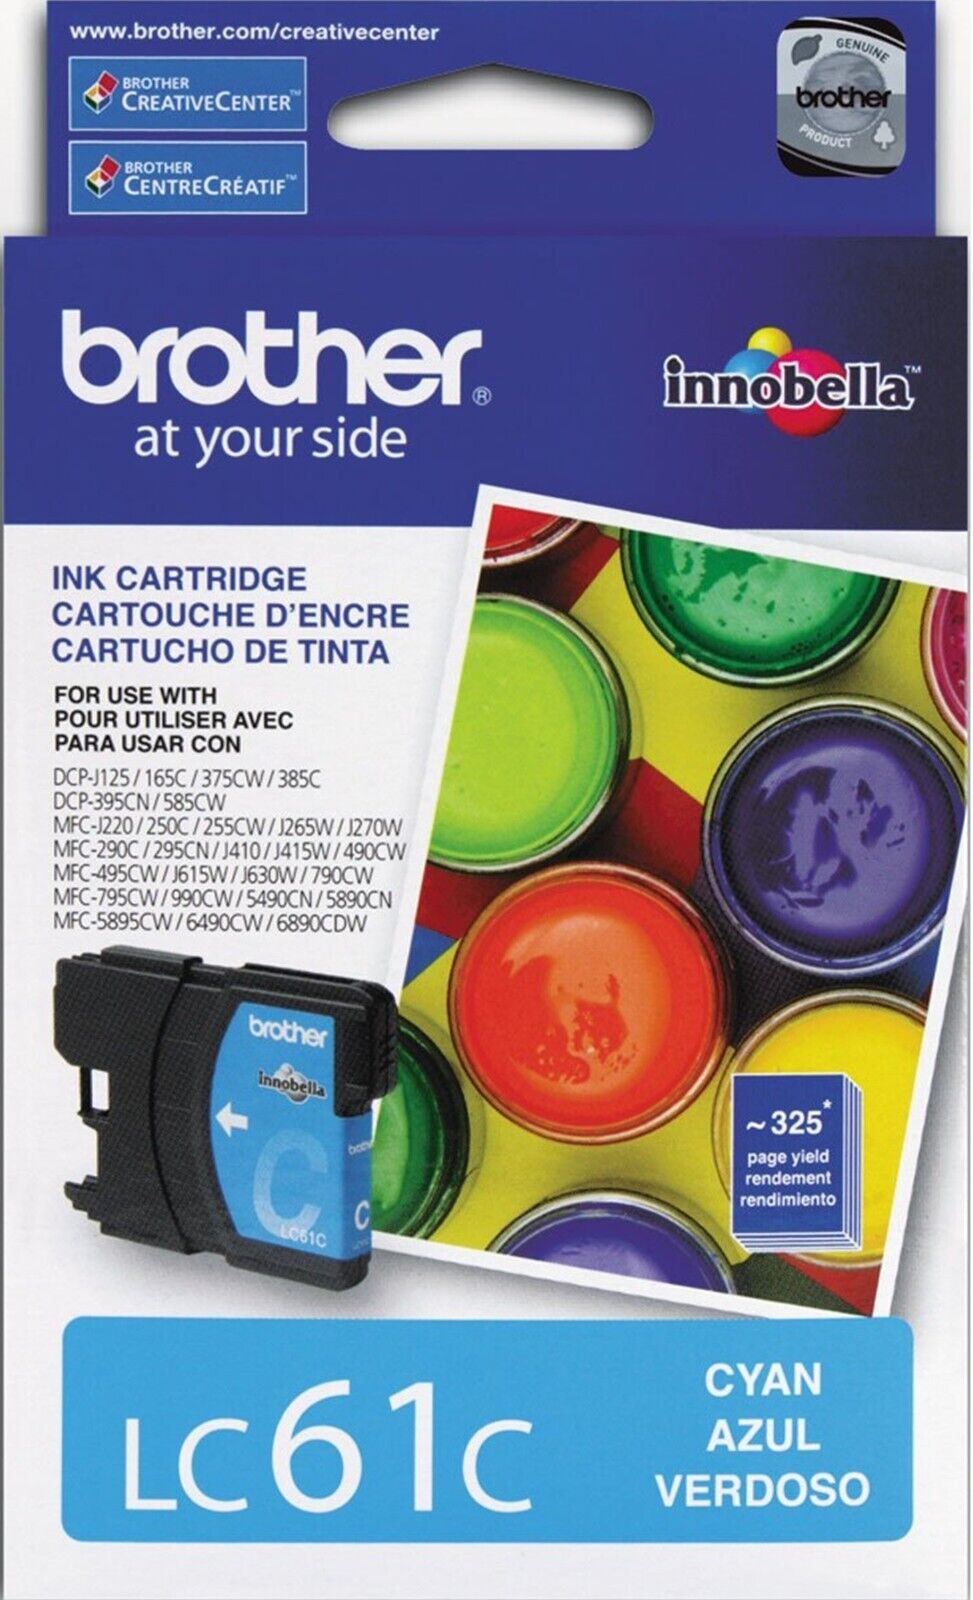 New Genuine Brother LC61 Cyan Ink Cartridges MFC-255CW MFC-290C MFC-295CN